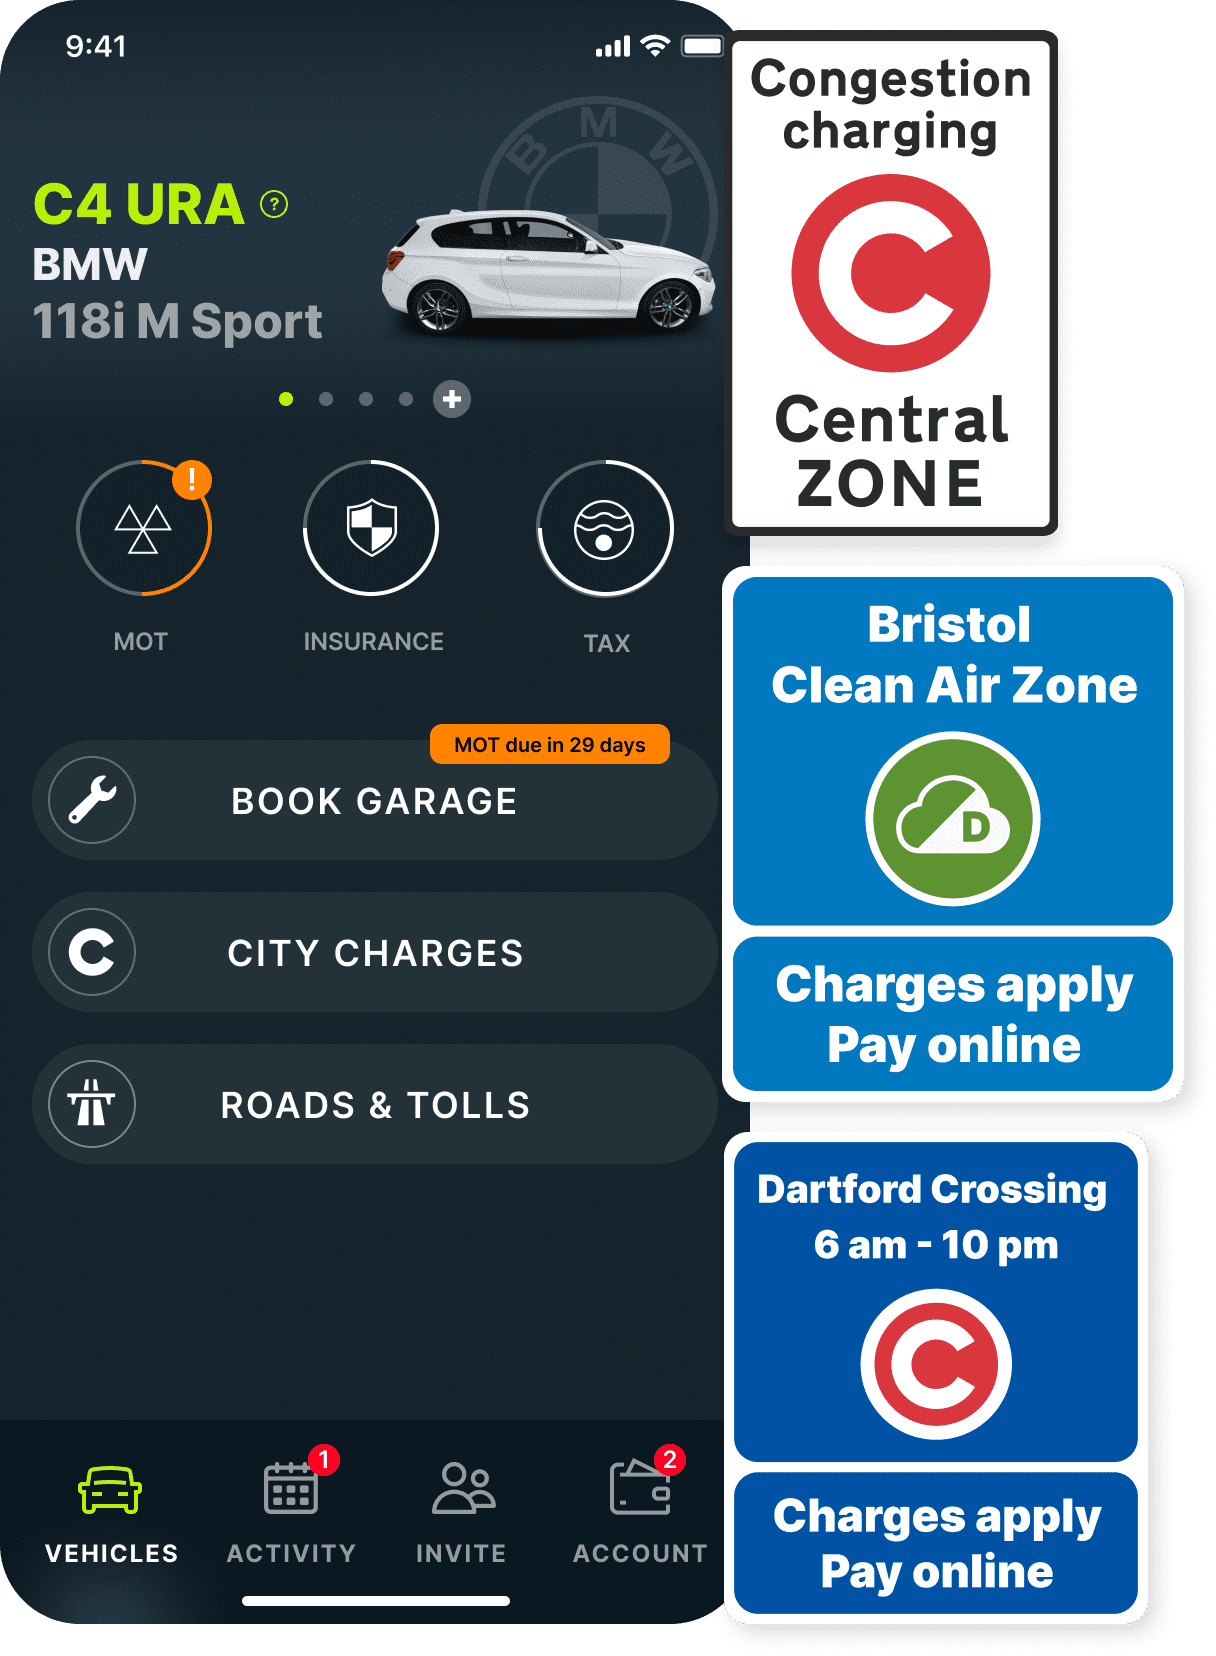 Caura home screen showing MOT, insurance and tax features as well road signs that are examples of charges you can pay in the app